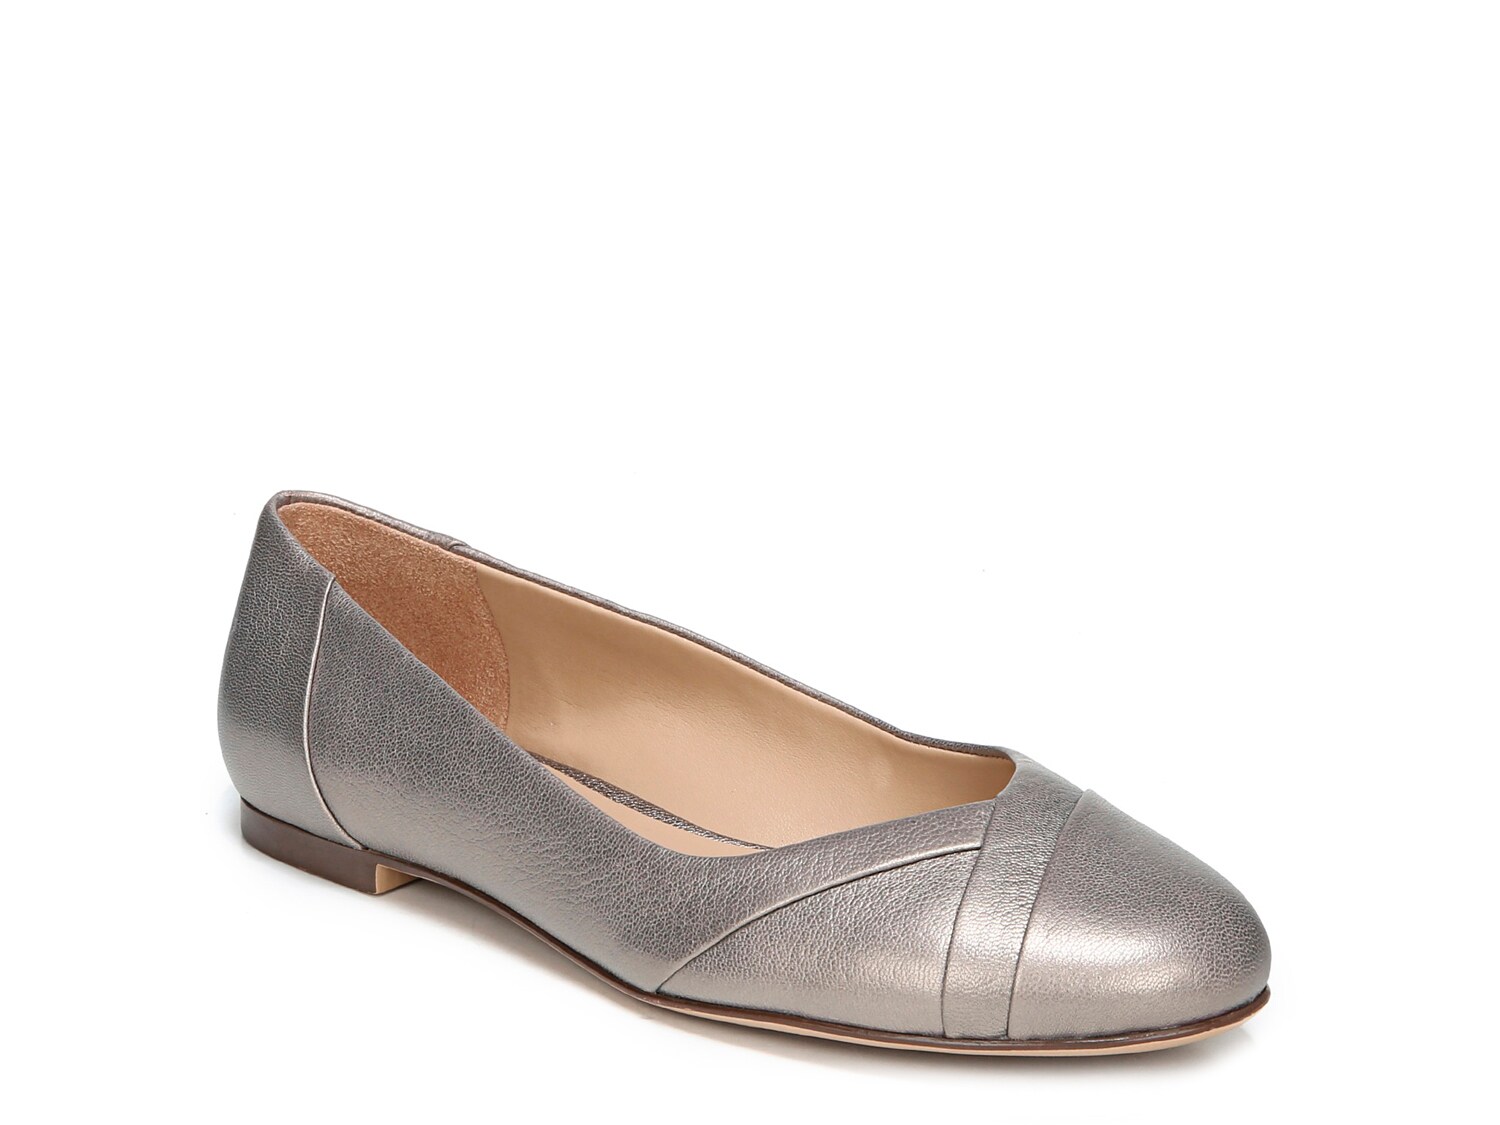 naturalizer women's gilly flat